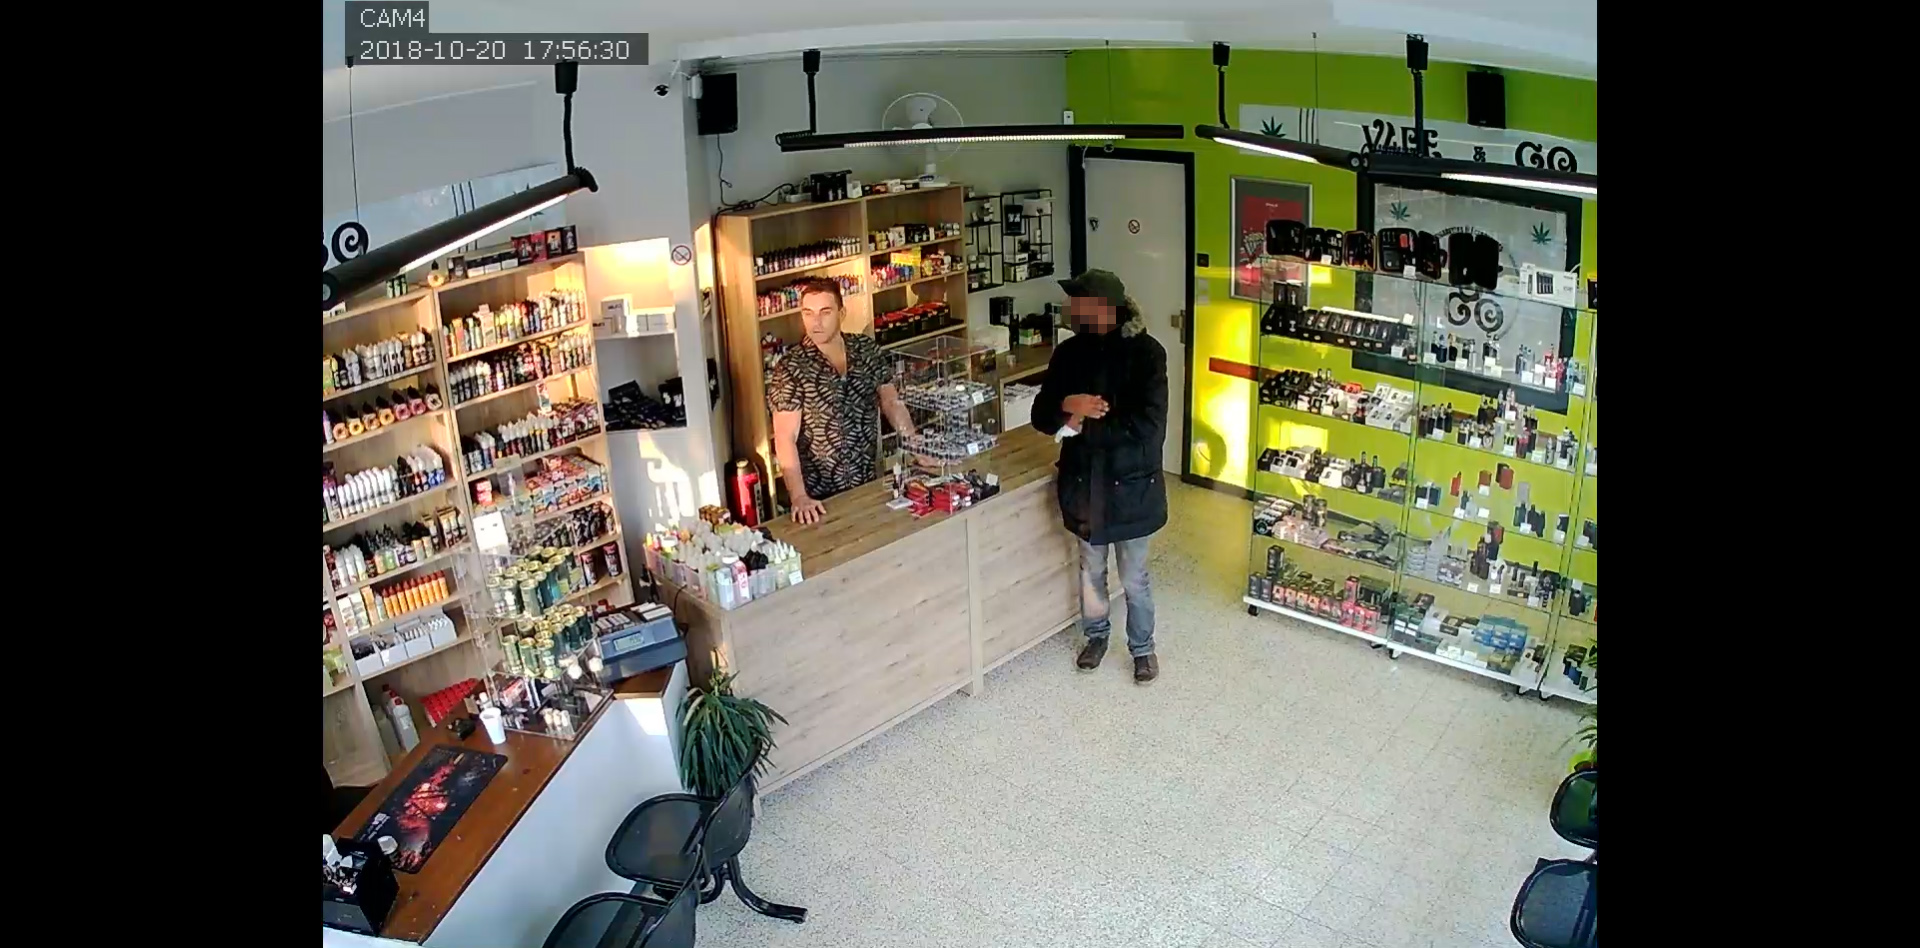 PHOTO: A man from a group that attempted to rob an e-cigarette store in Montignies-sur-Sambre, Belgium, speaks to the owner of the store after returning to the store later in the day, Oct. 20, 2018.